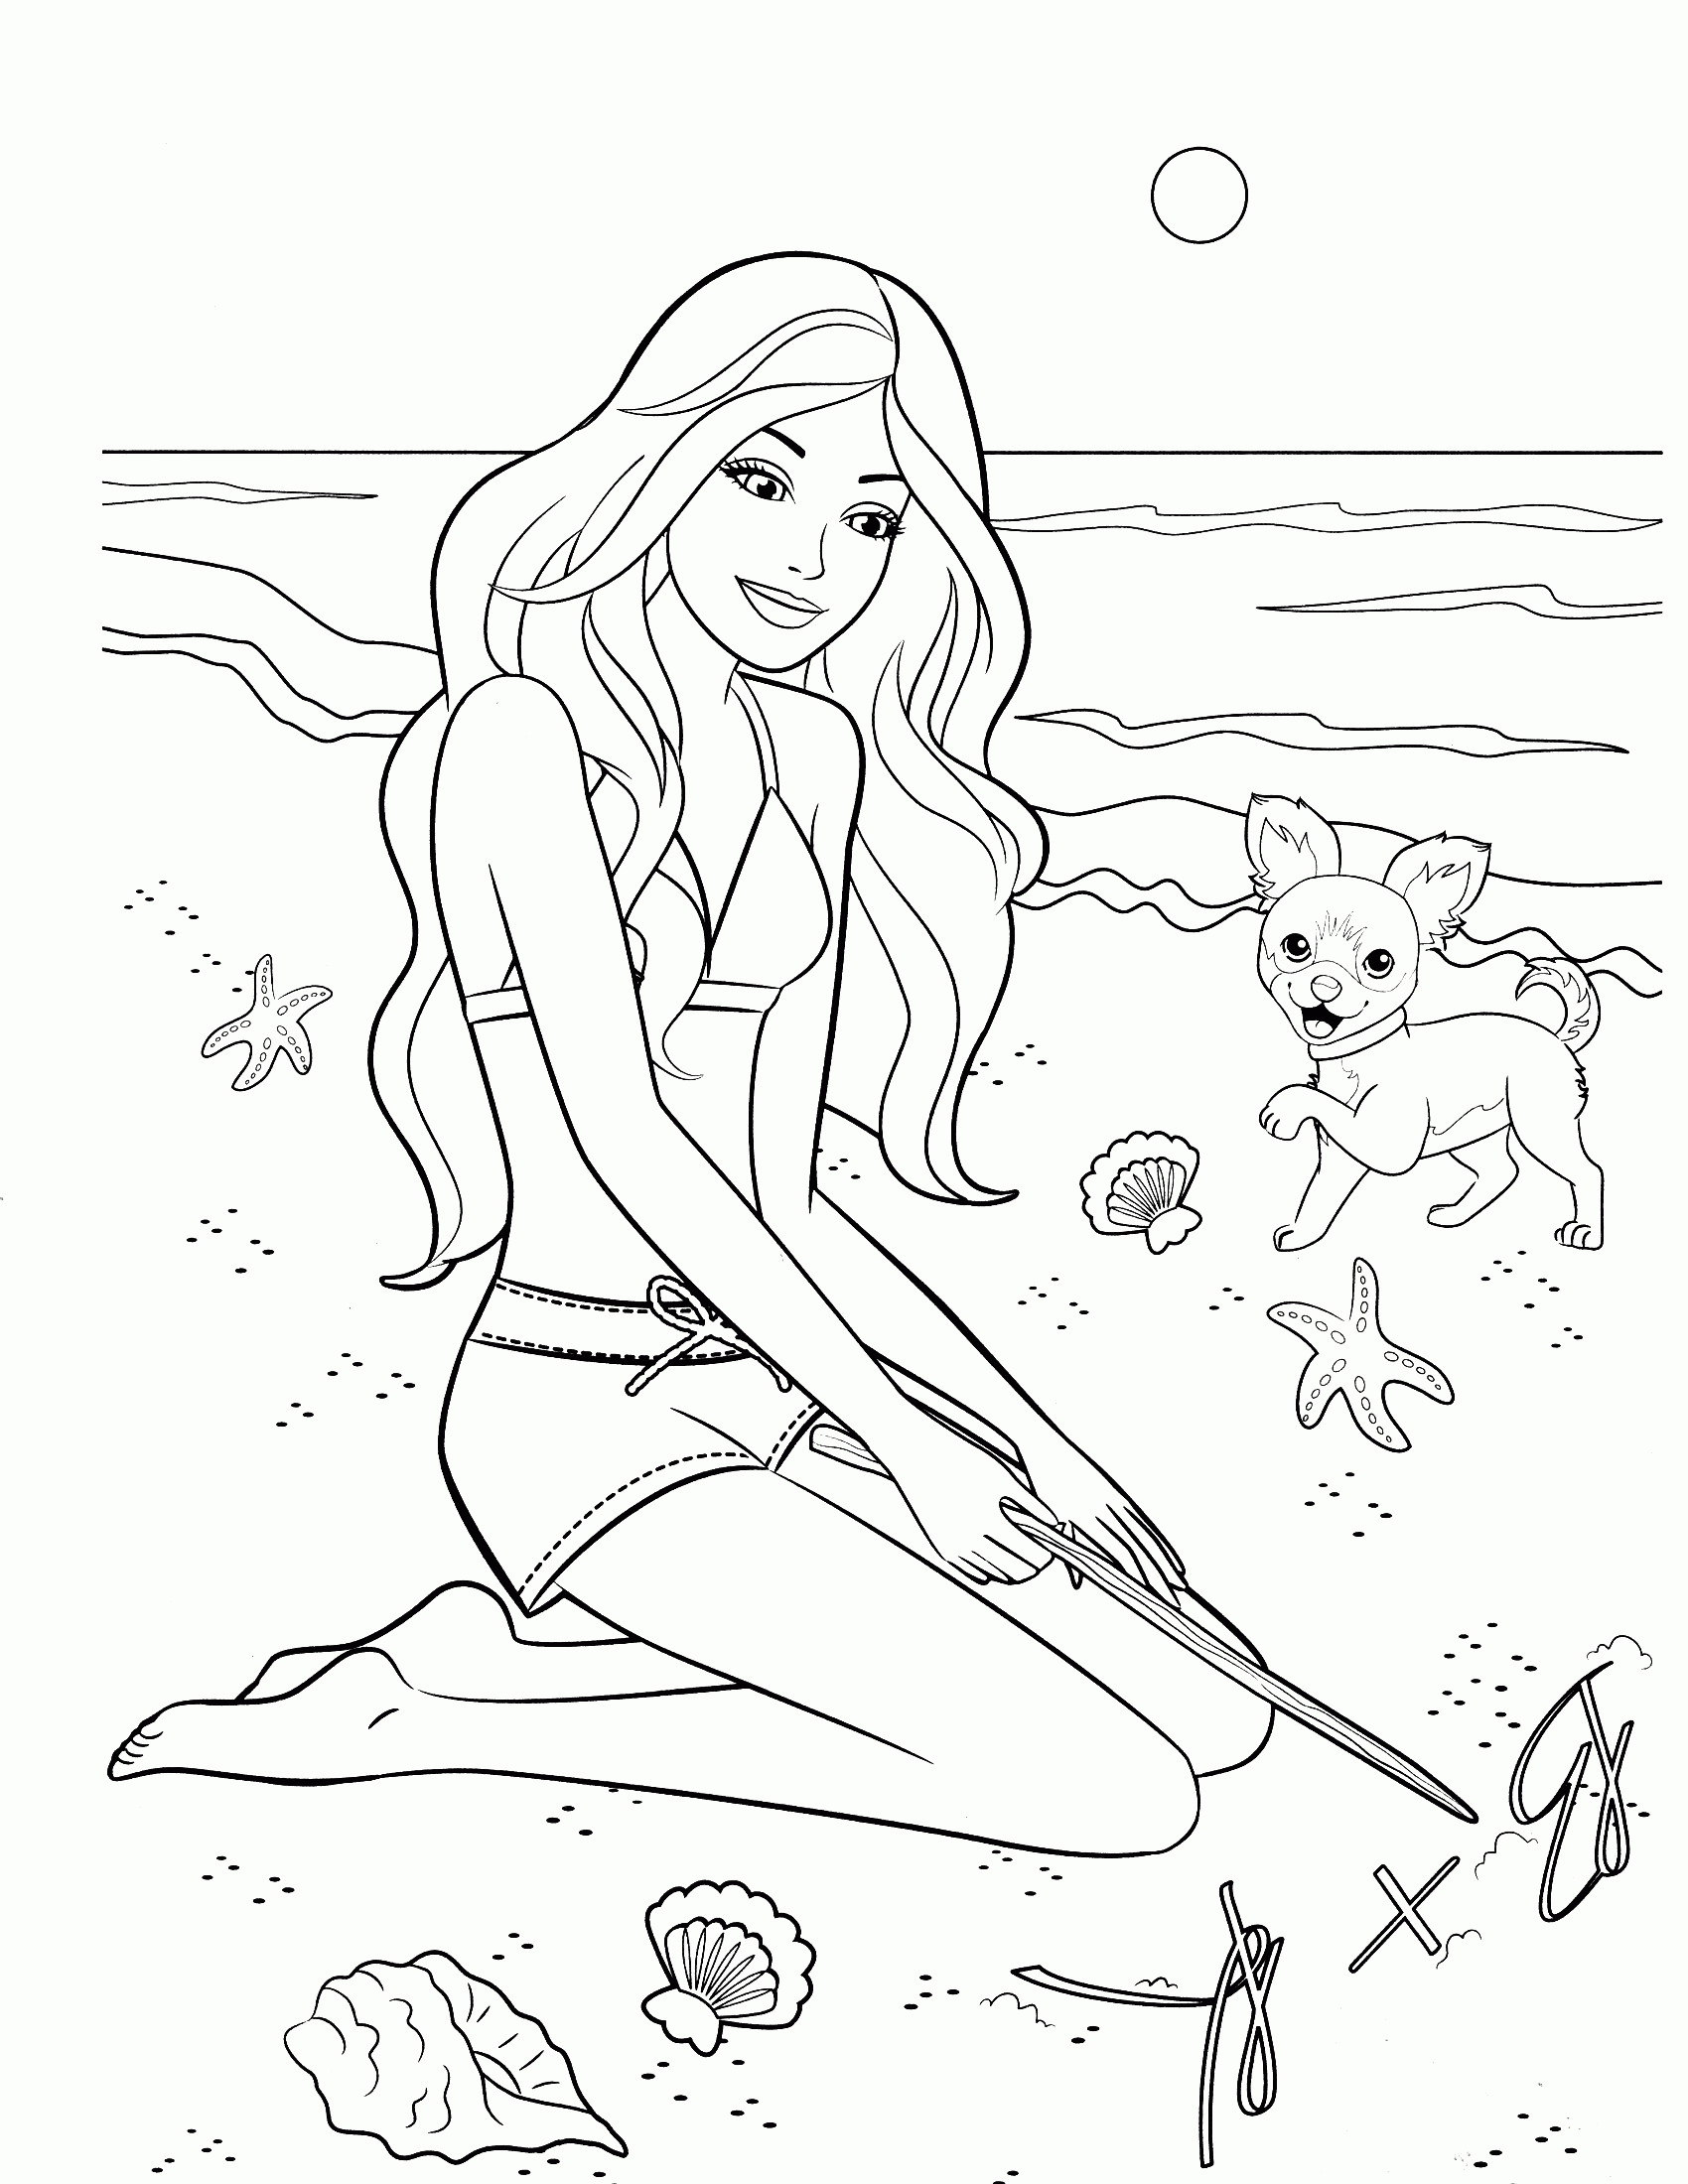 Barbie Coloring Pages Hairstyle Free To Print - VoteForVerde.com